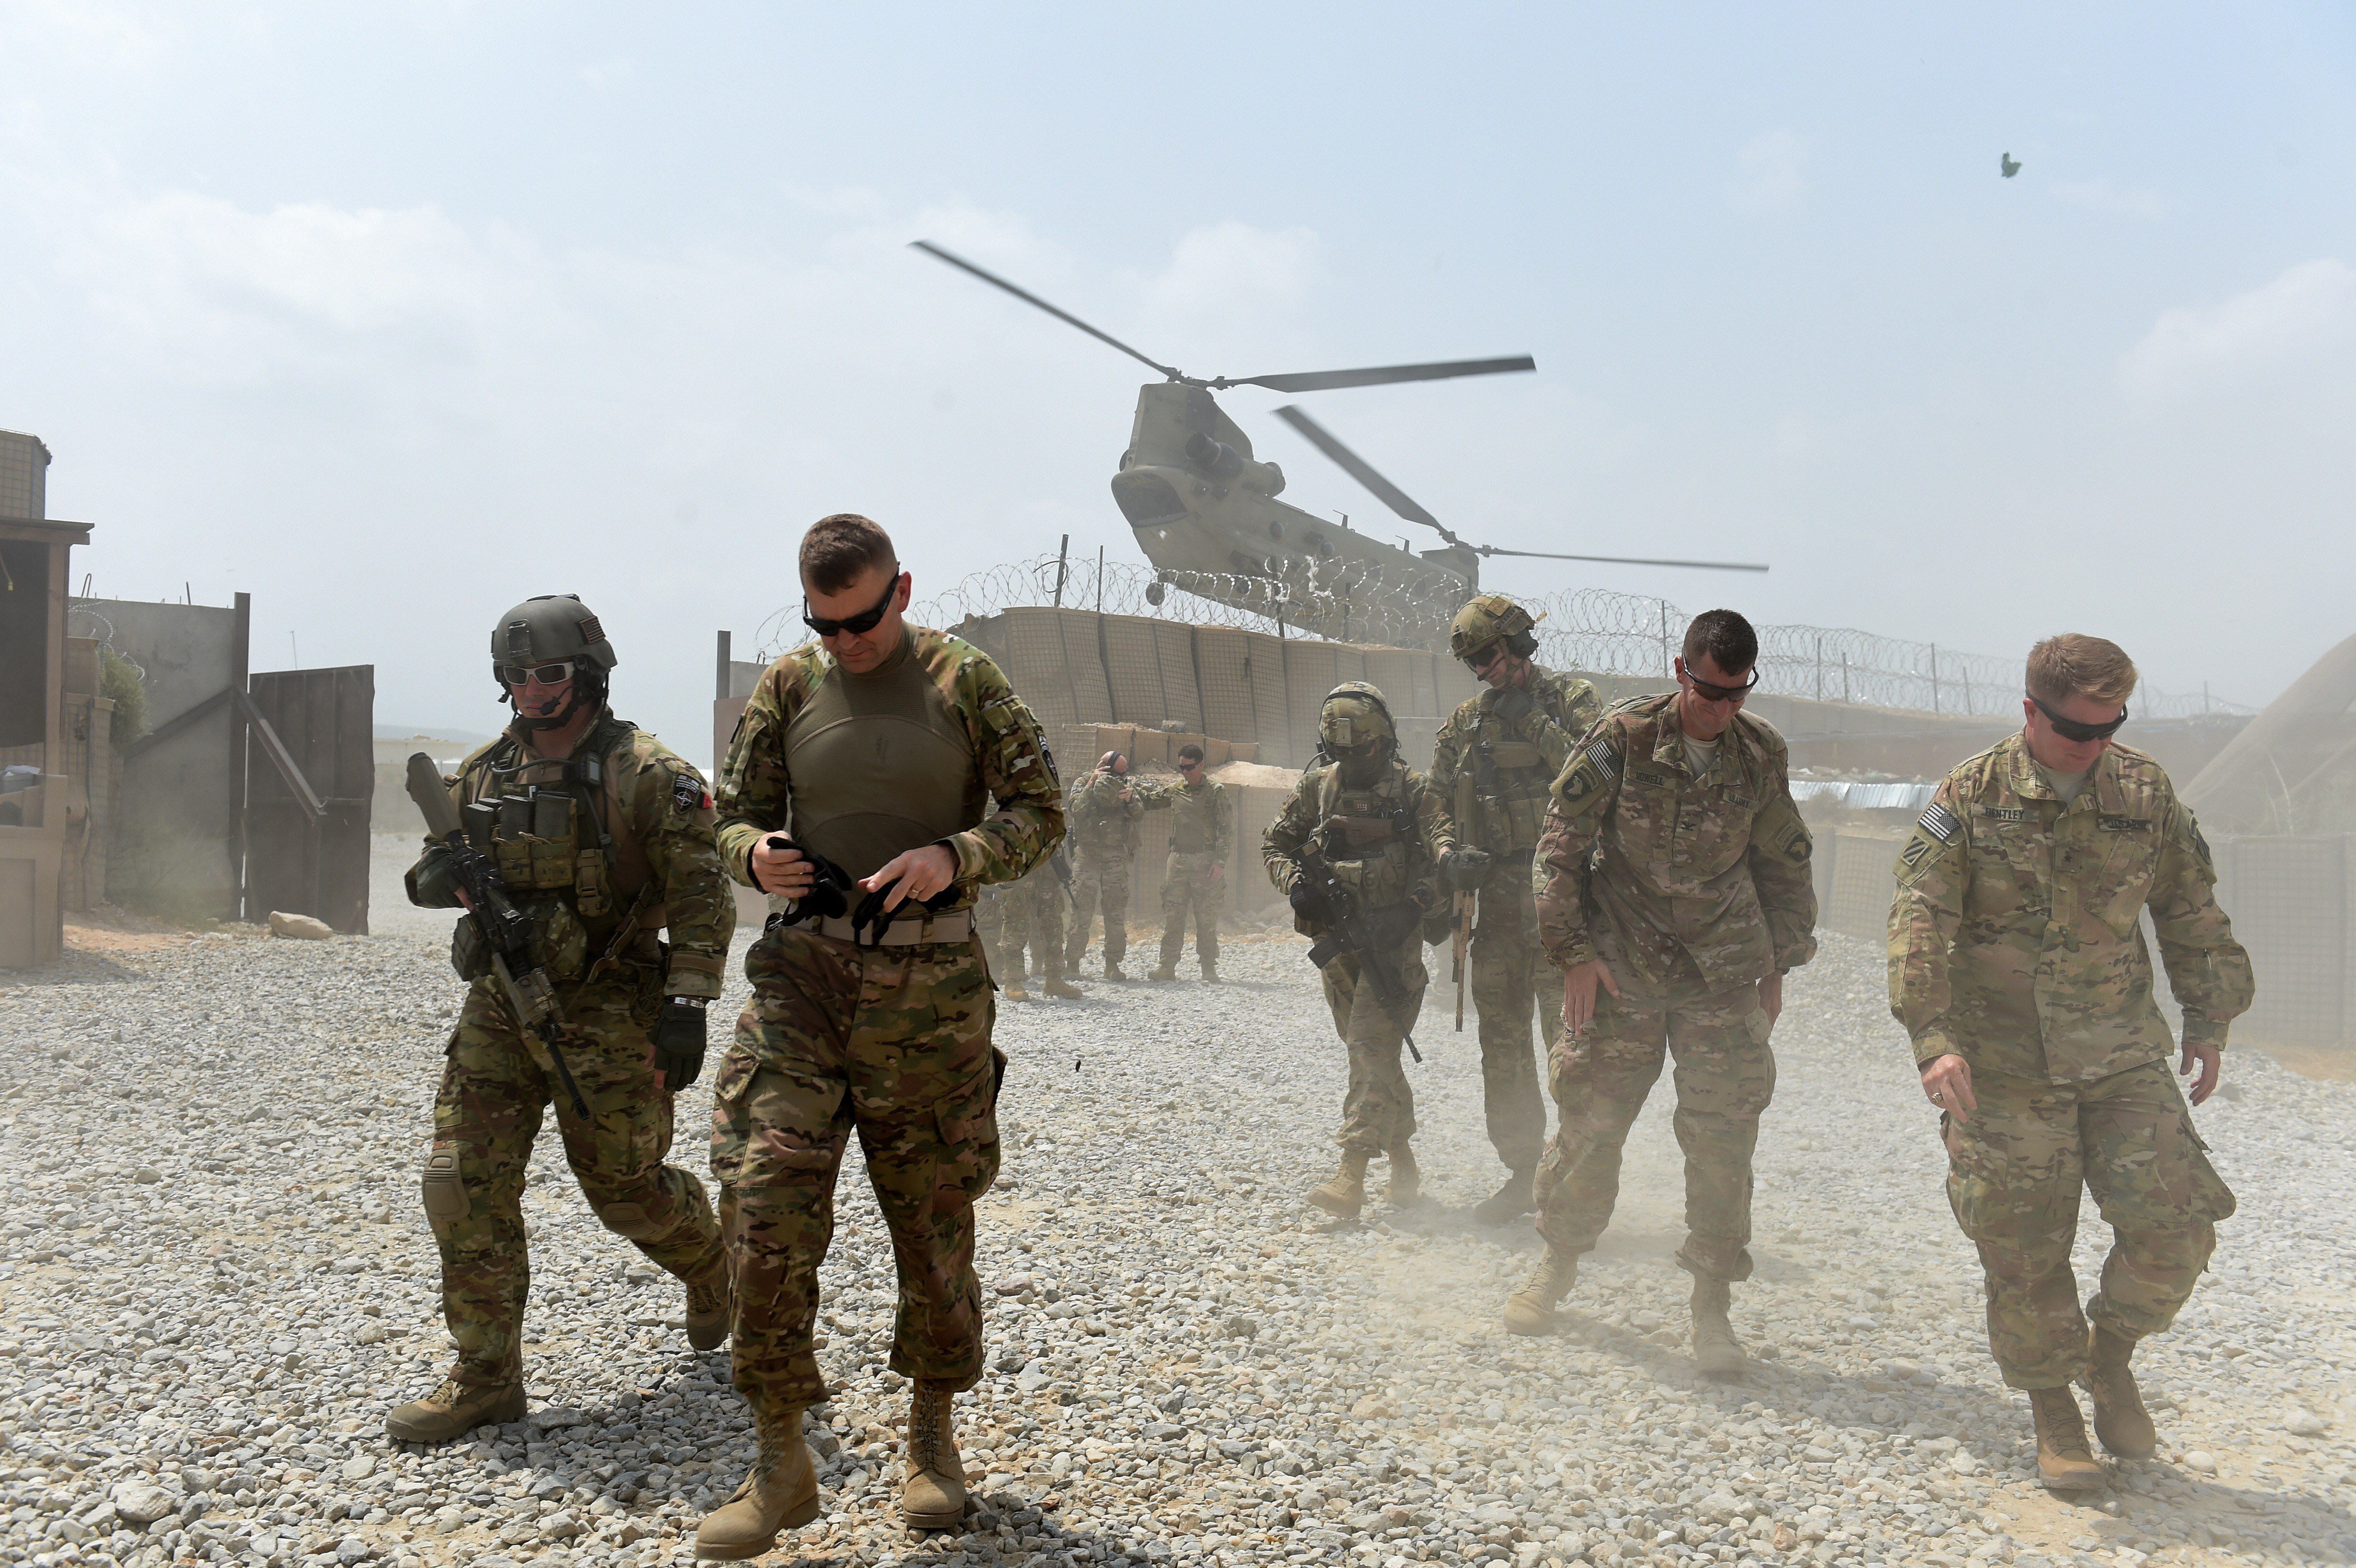 Republicans and Democrats agree that the Afghanistan war wasn't worth it,  an AP-NORC poll shows